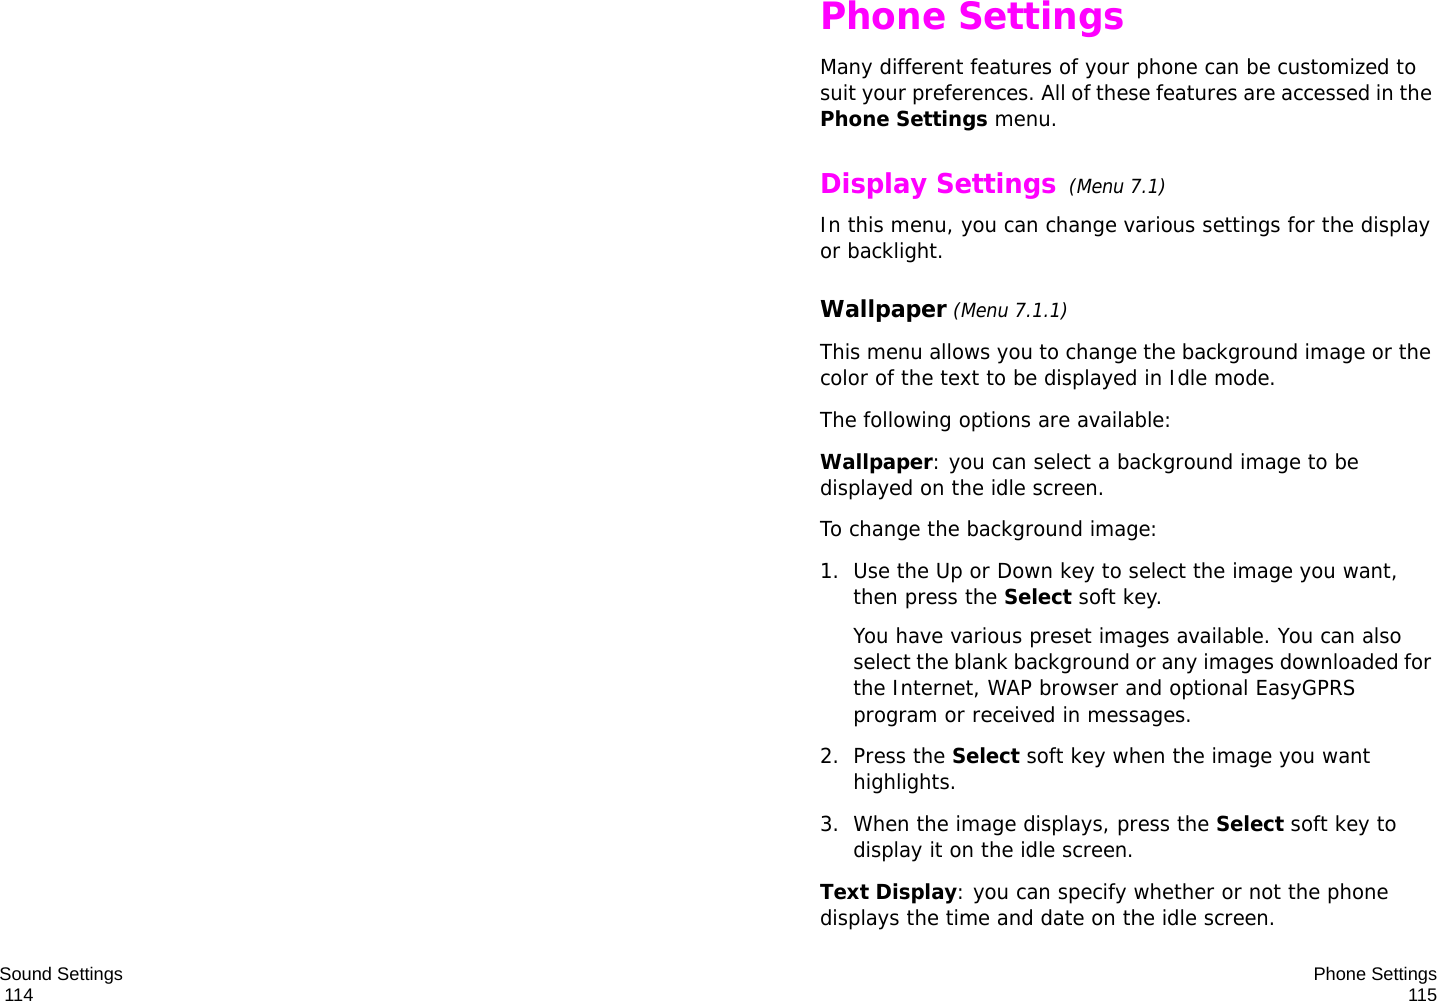 Sound Settings                                                                                       114 Phone Settings115Phone SettingsMany different features of your phone can be customized to suit your preferences. All of these features are accessed in the Phone Settings menu.Display Settings  (Menu 7.1)In this menu, you can change various settings for the display or backlight.Wallpaper (Menu 7.1.1)This menu allows you to change the background image or the color of the text to be displayed in Idle mode.The following options are available:Wallpaper: you can select a background image to be displayed on the idle screen.To change the background image:1. Use the Up or Down key to select the image you want, then press the Select soft key.You have various preset images available. You can also select the blank background or any images downloaded for the Internet, WAP browser and optional EasyGPRS program or received in messages. 2. Press the Select soft key when the image you want highlights.3. When the image displays, press the Select soft key to display it on the idle screen.Text Display: you can specify whether or not the phone displays the time and date on the idle screen.